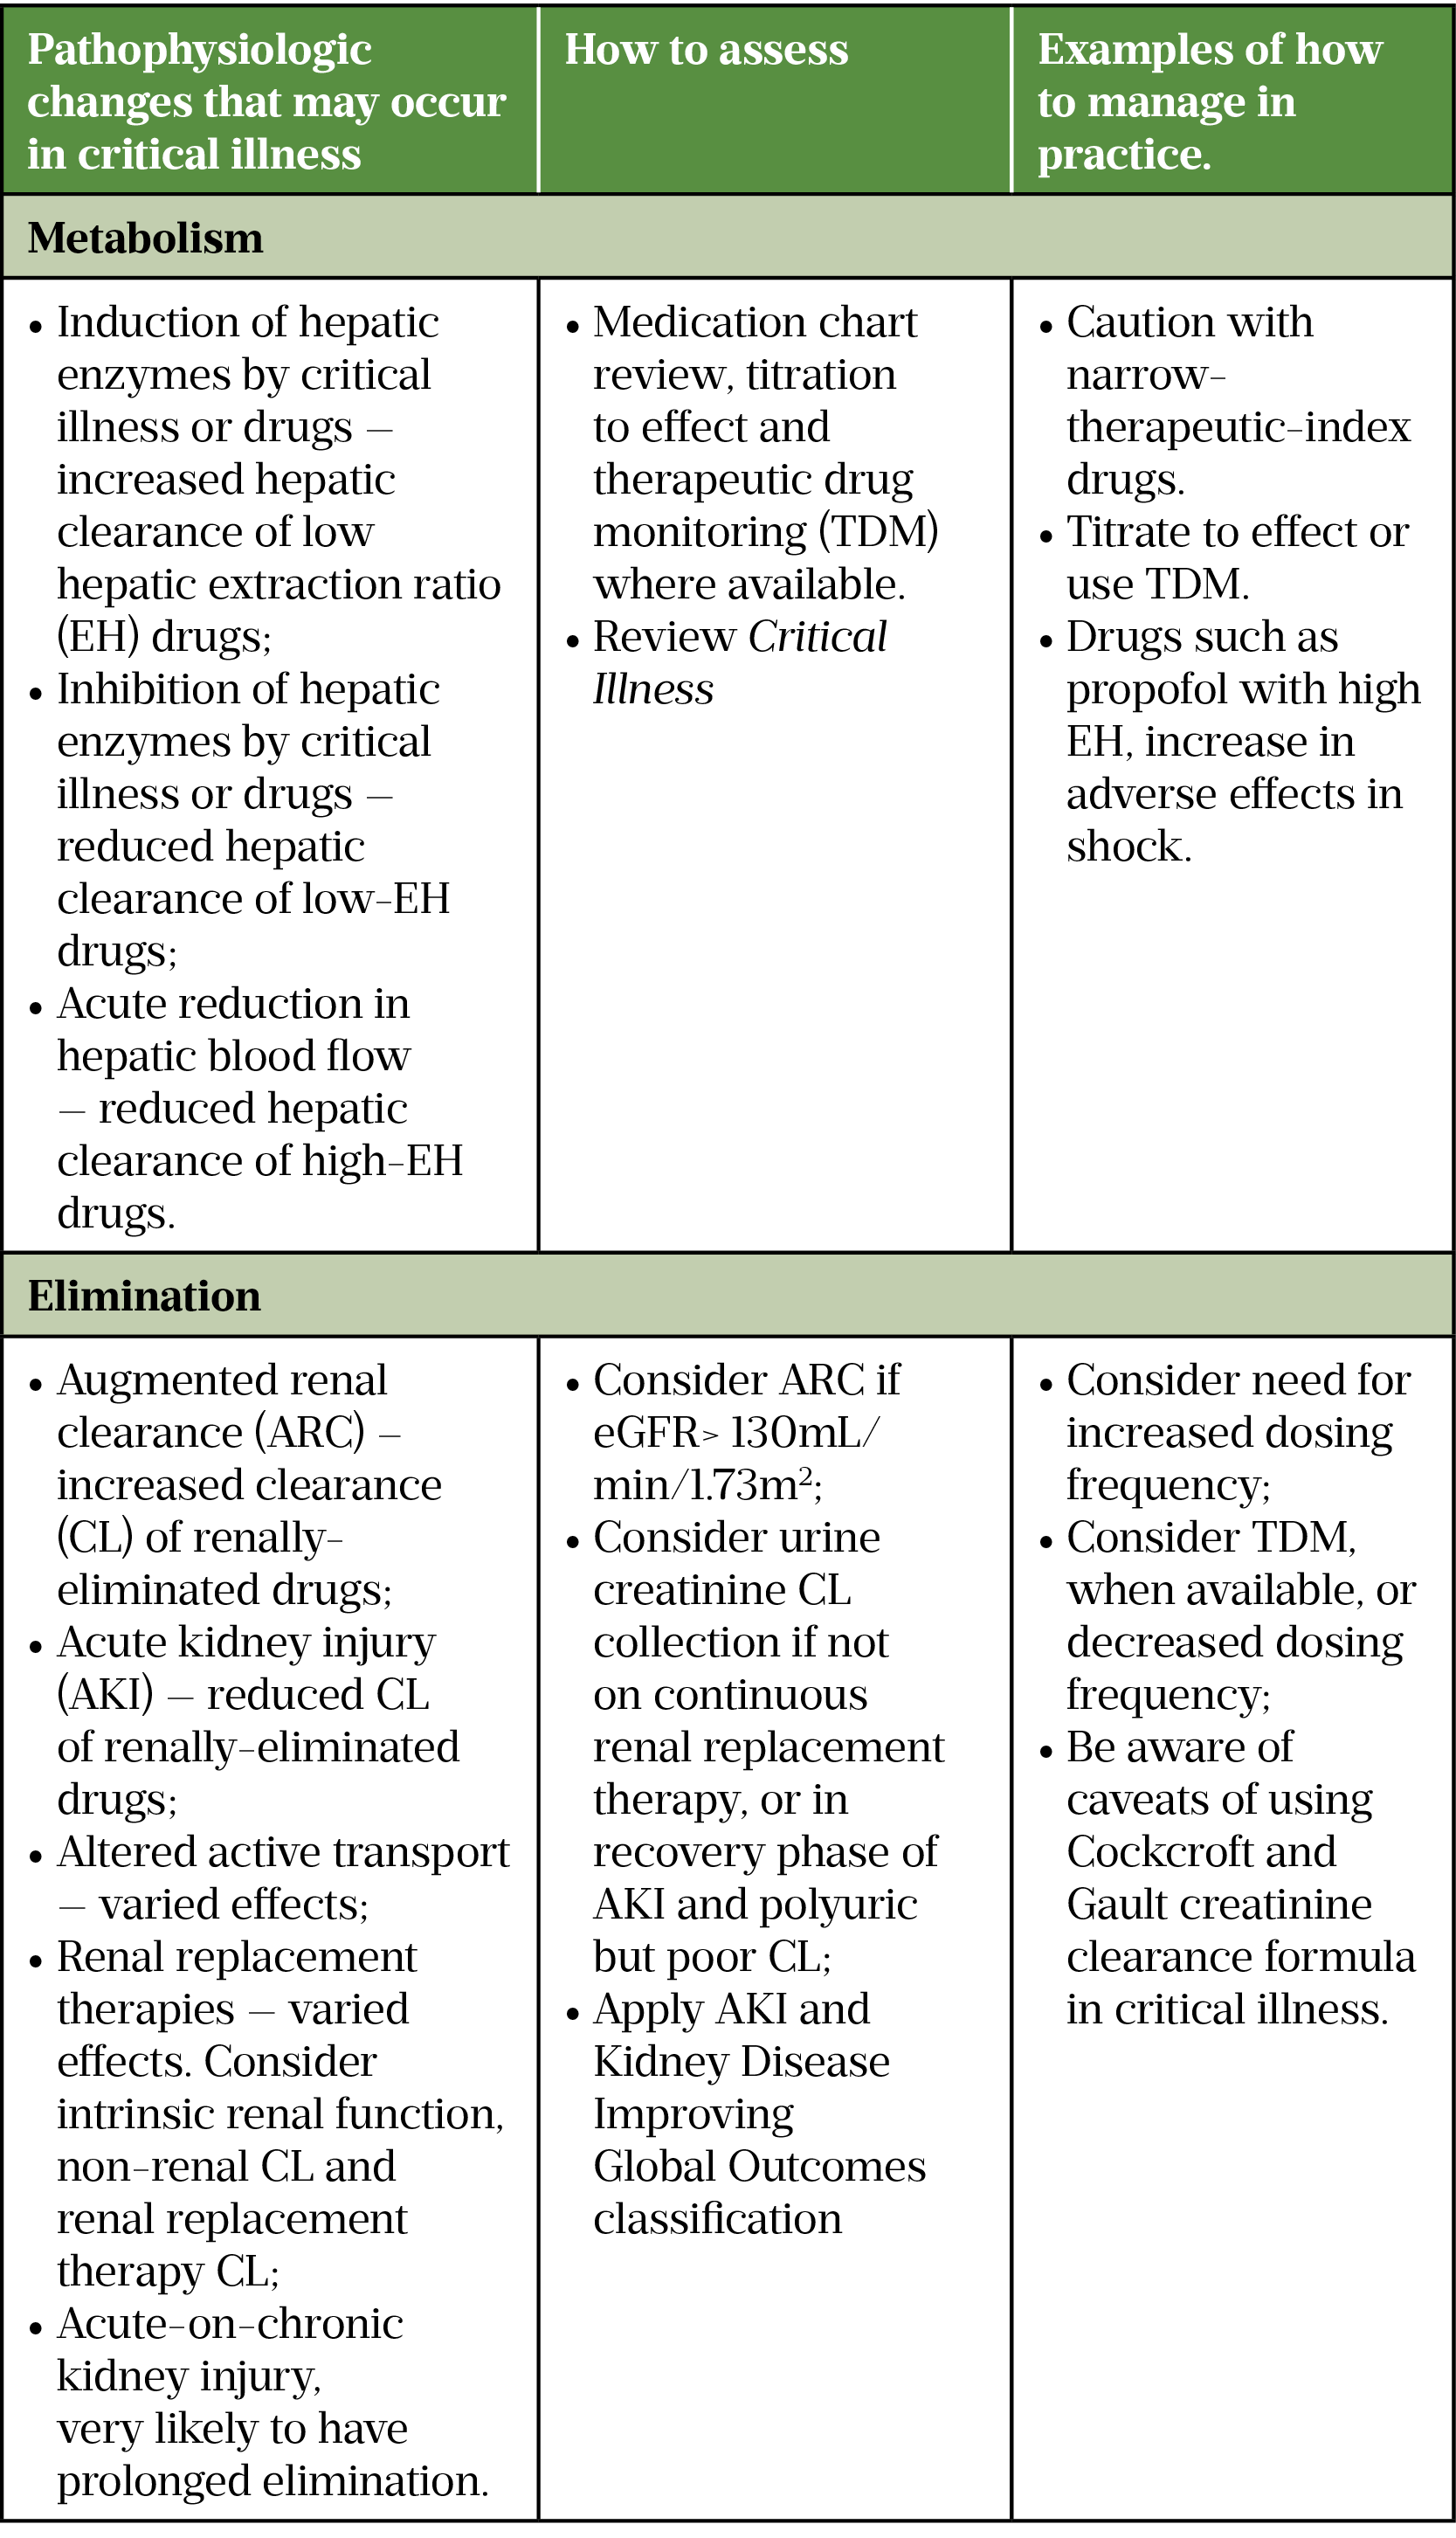 Table 7: Examples of changes in metabolism and elimination of drugs that may occur in critical illness